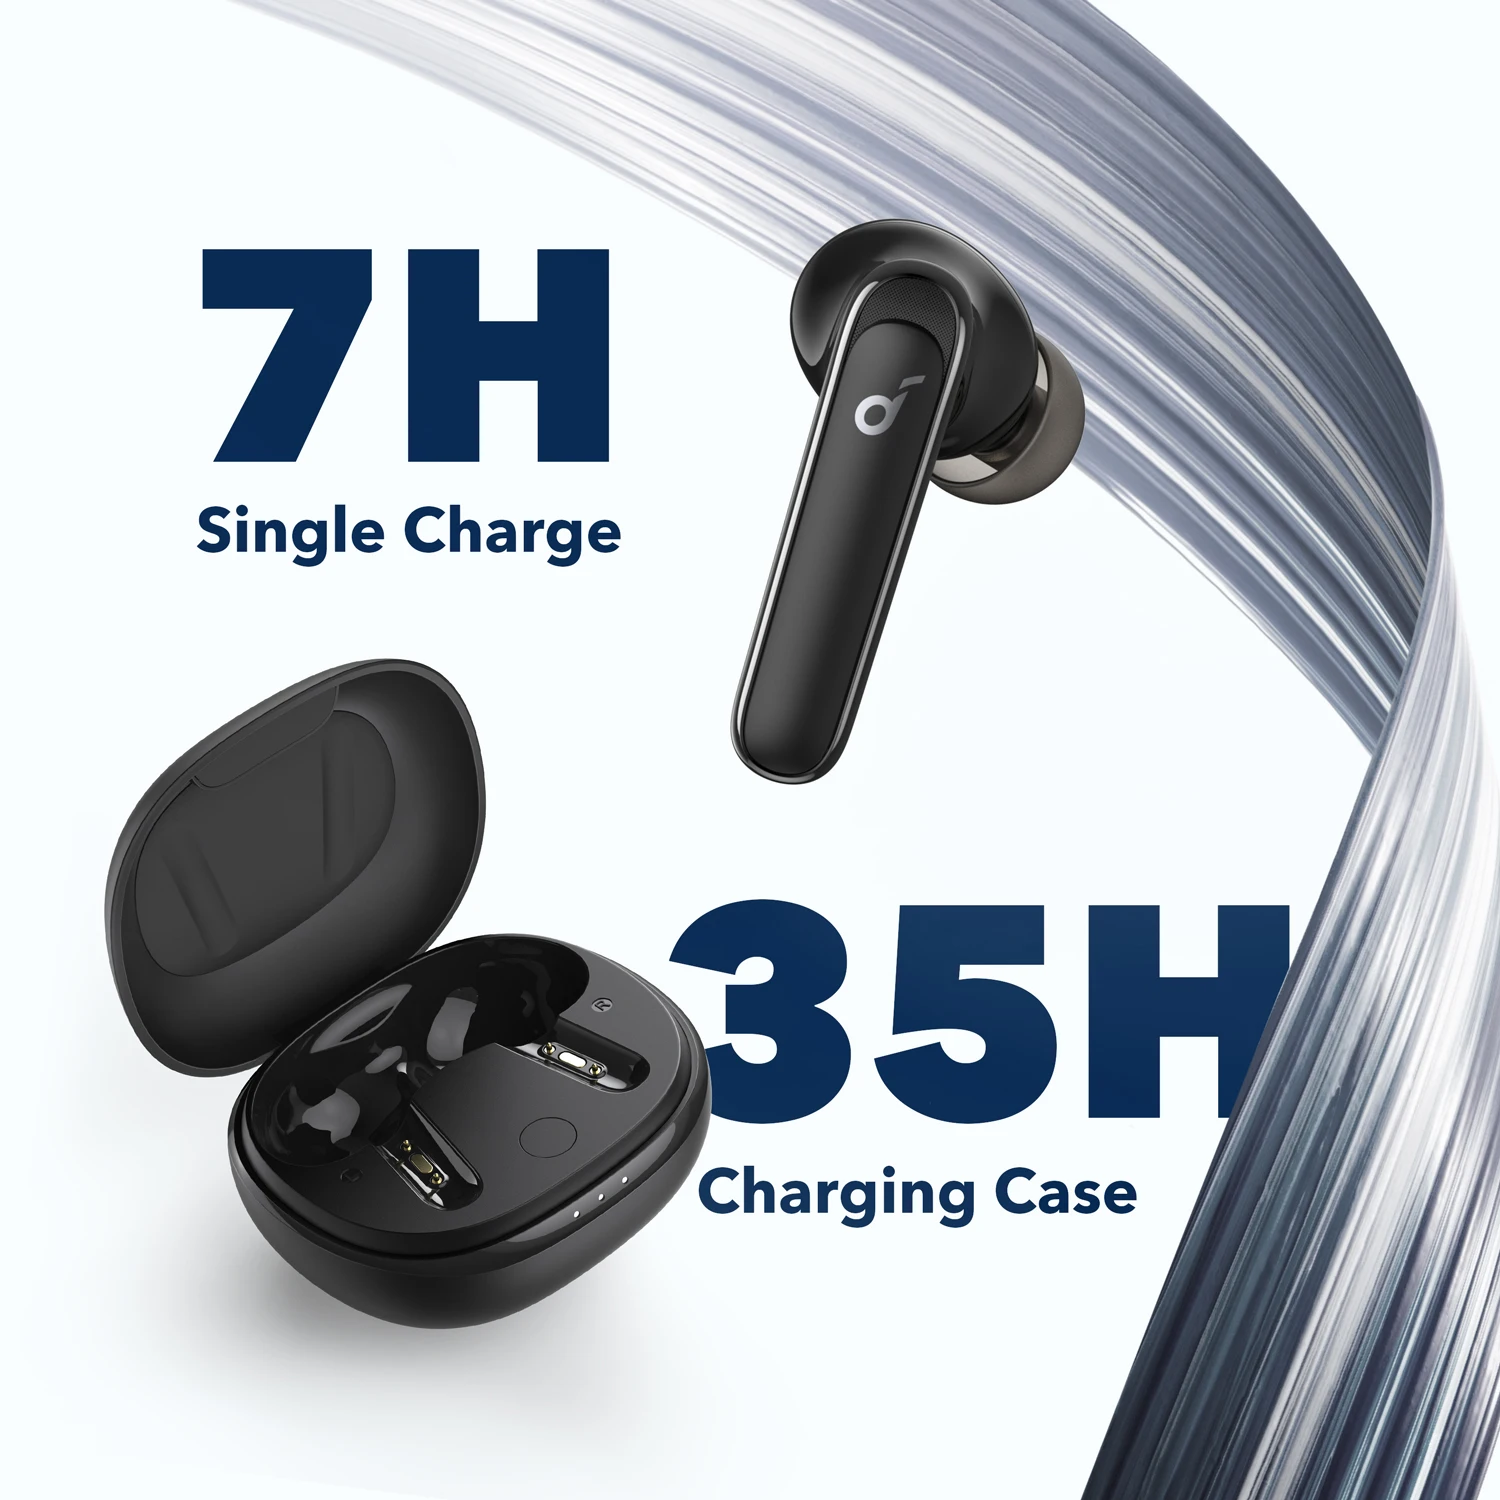 Anker Soundcore Life P3 Noise Cancelling wireless Earbuds, bluetooth earphones, Thumping Bass, 6 Mics for Clear Calls images - 6